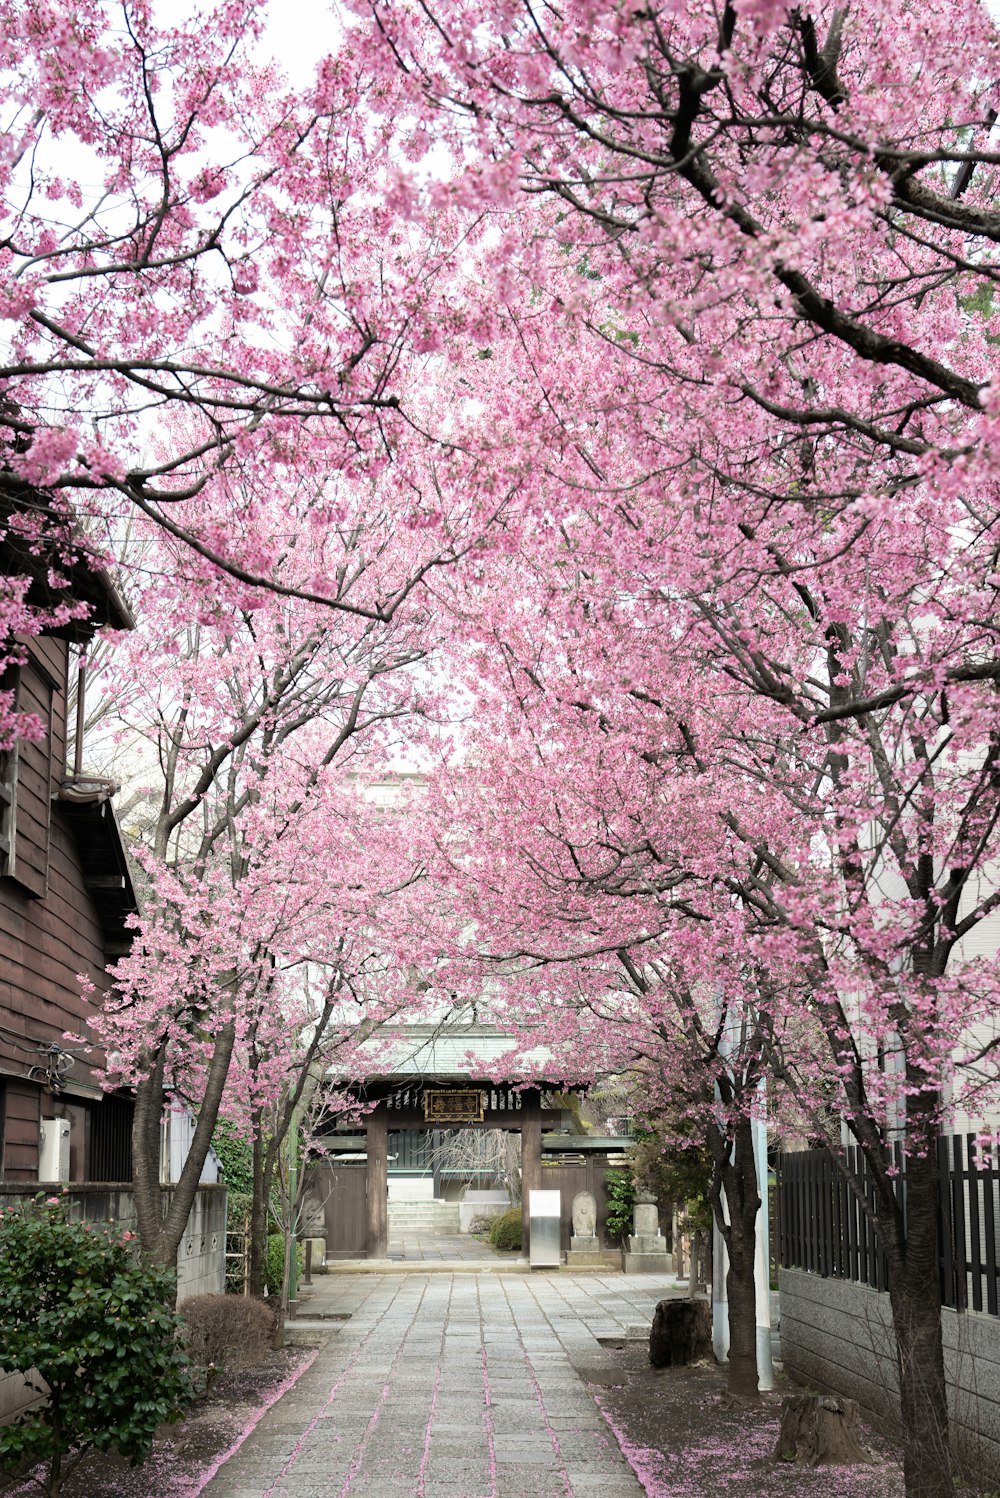 100+ Cherry Blossom Tree Pictures